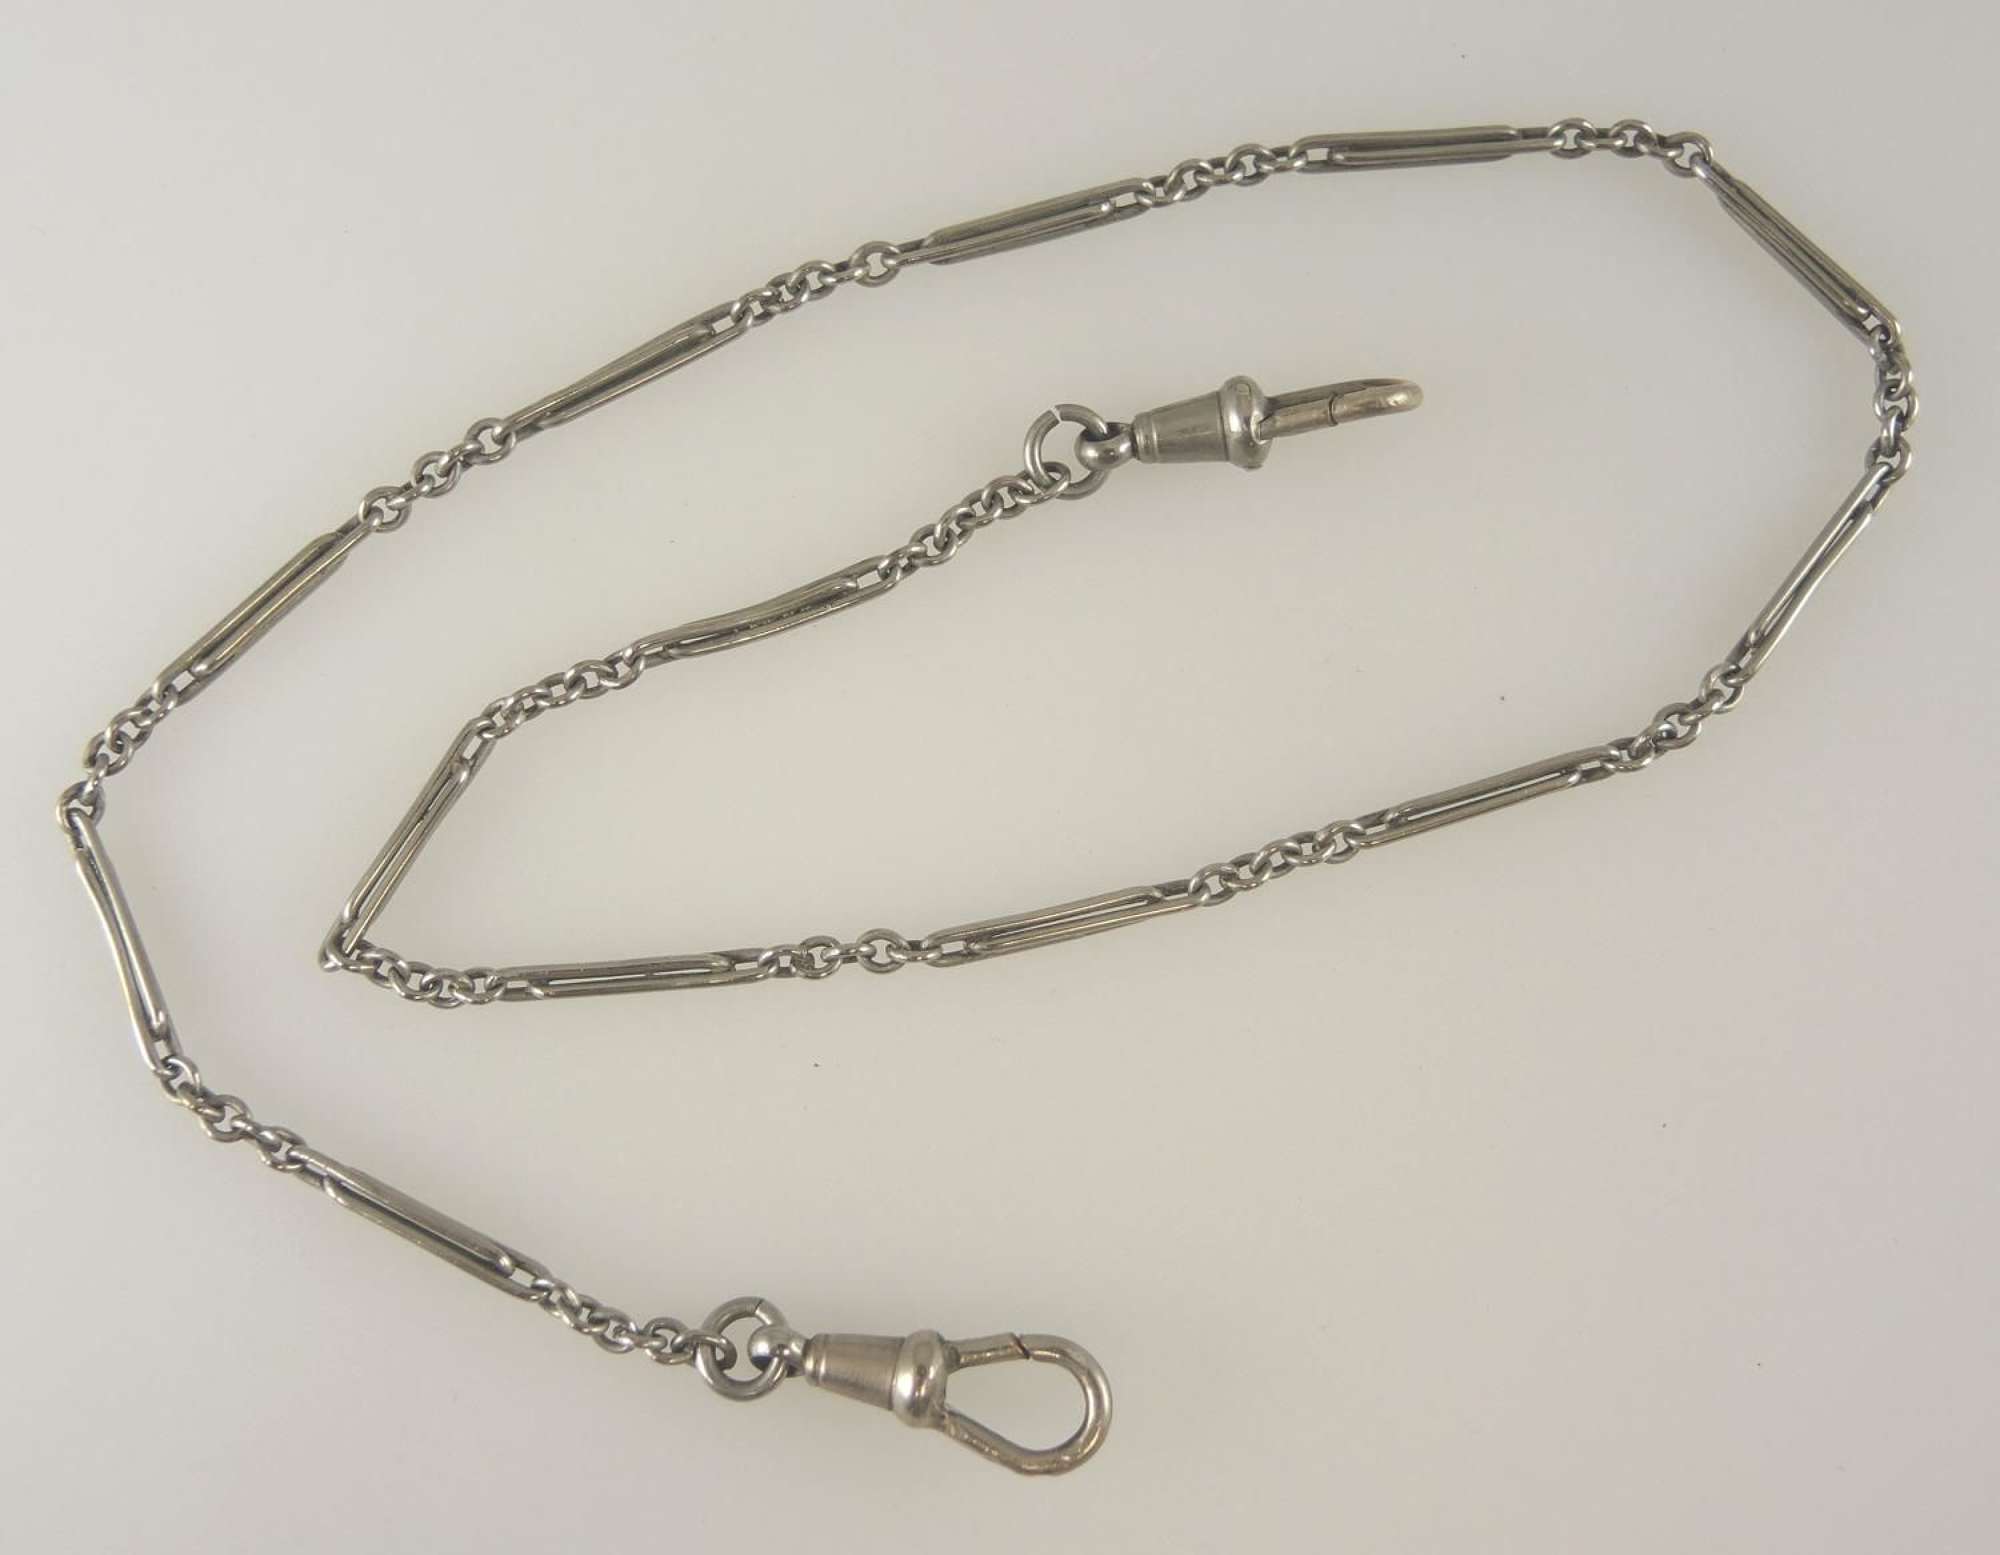 Fancy White gold filled watch chain c1910